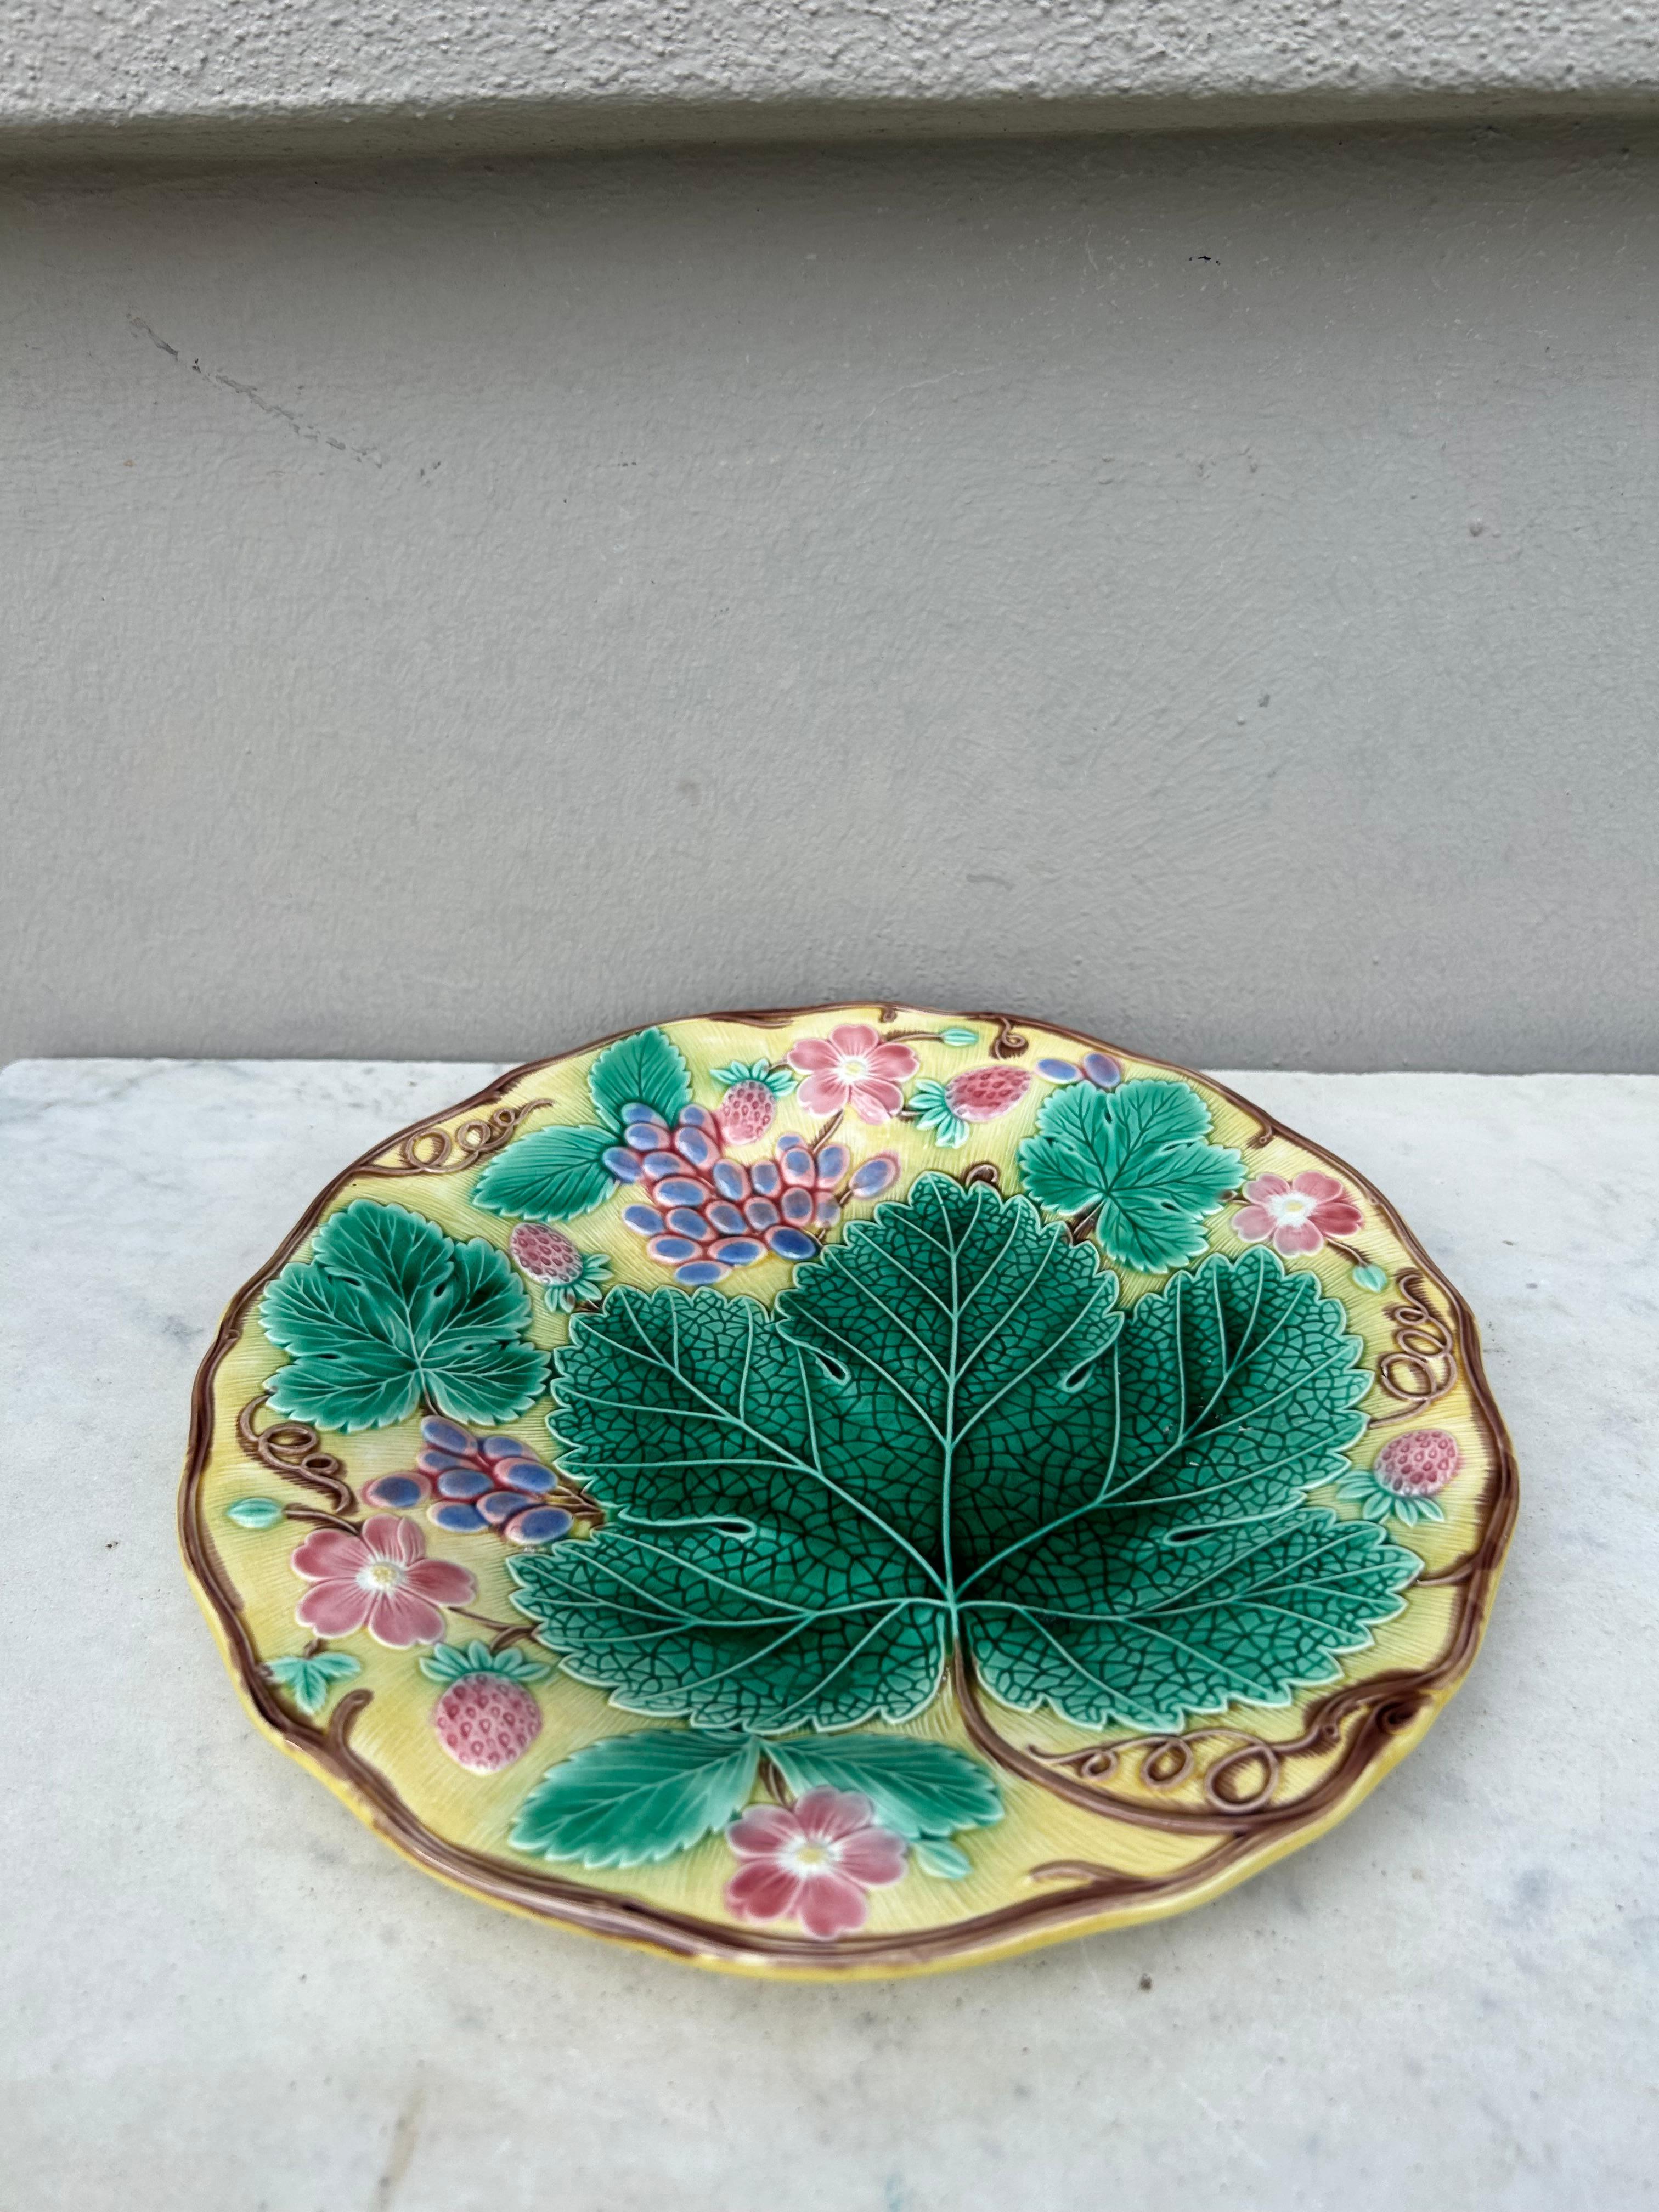 Majolica strawberry plate signed Wedgwood.
Diameter / 8.8 inches.